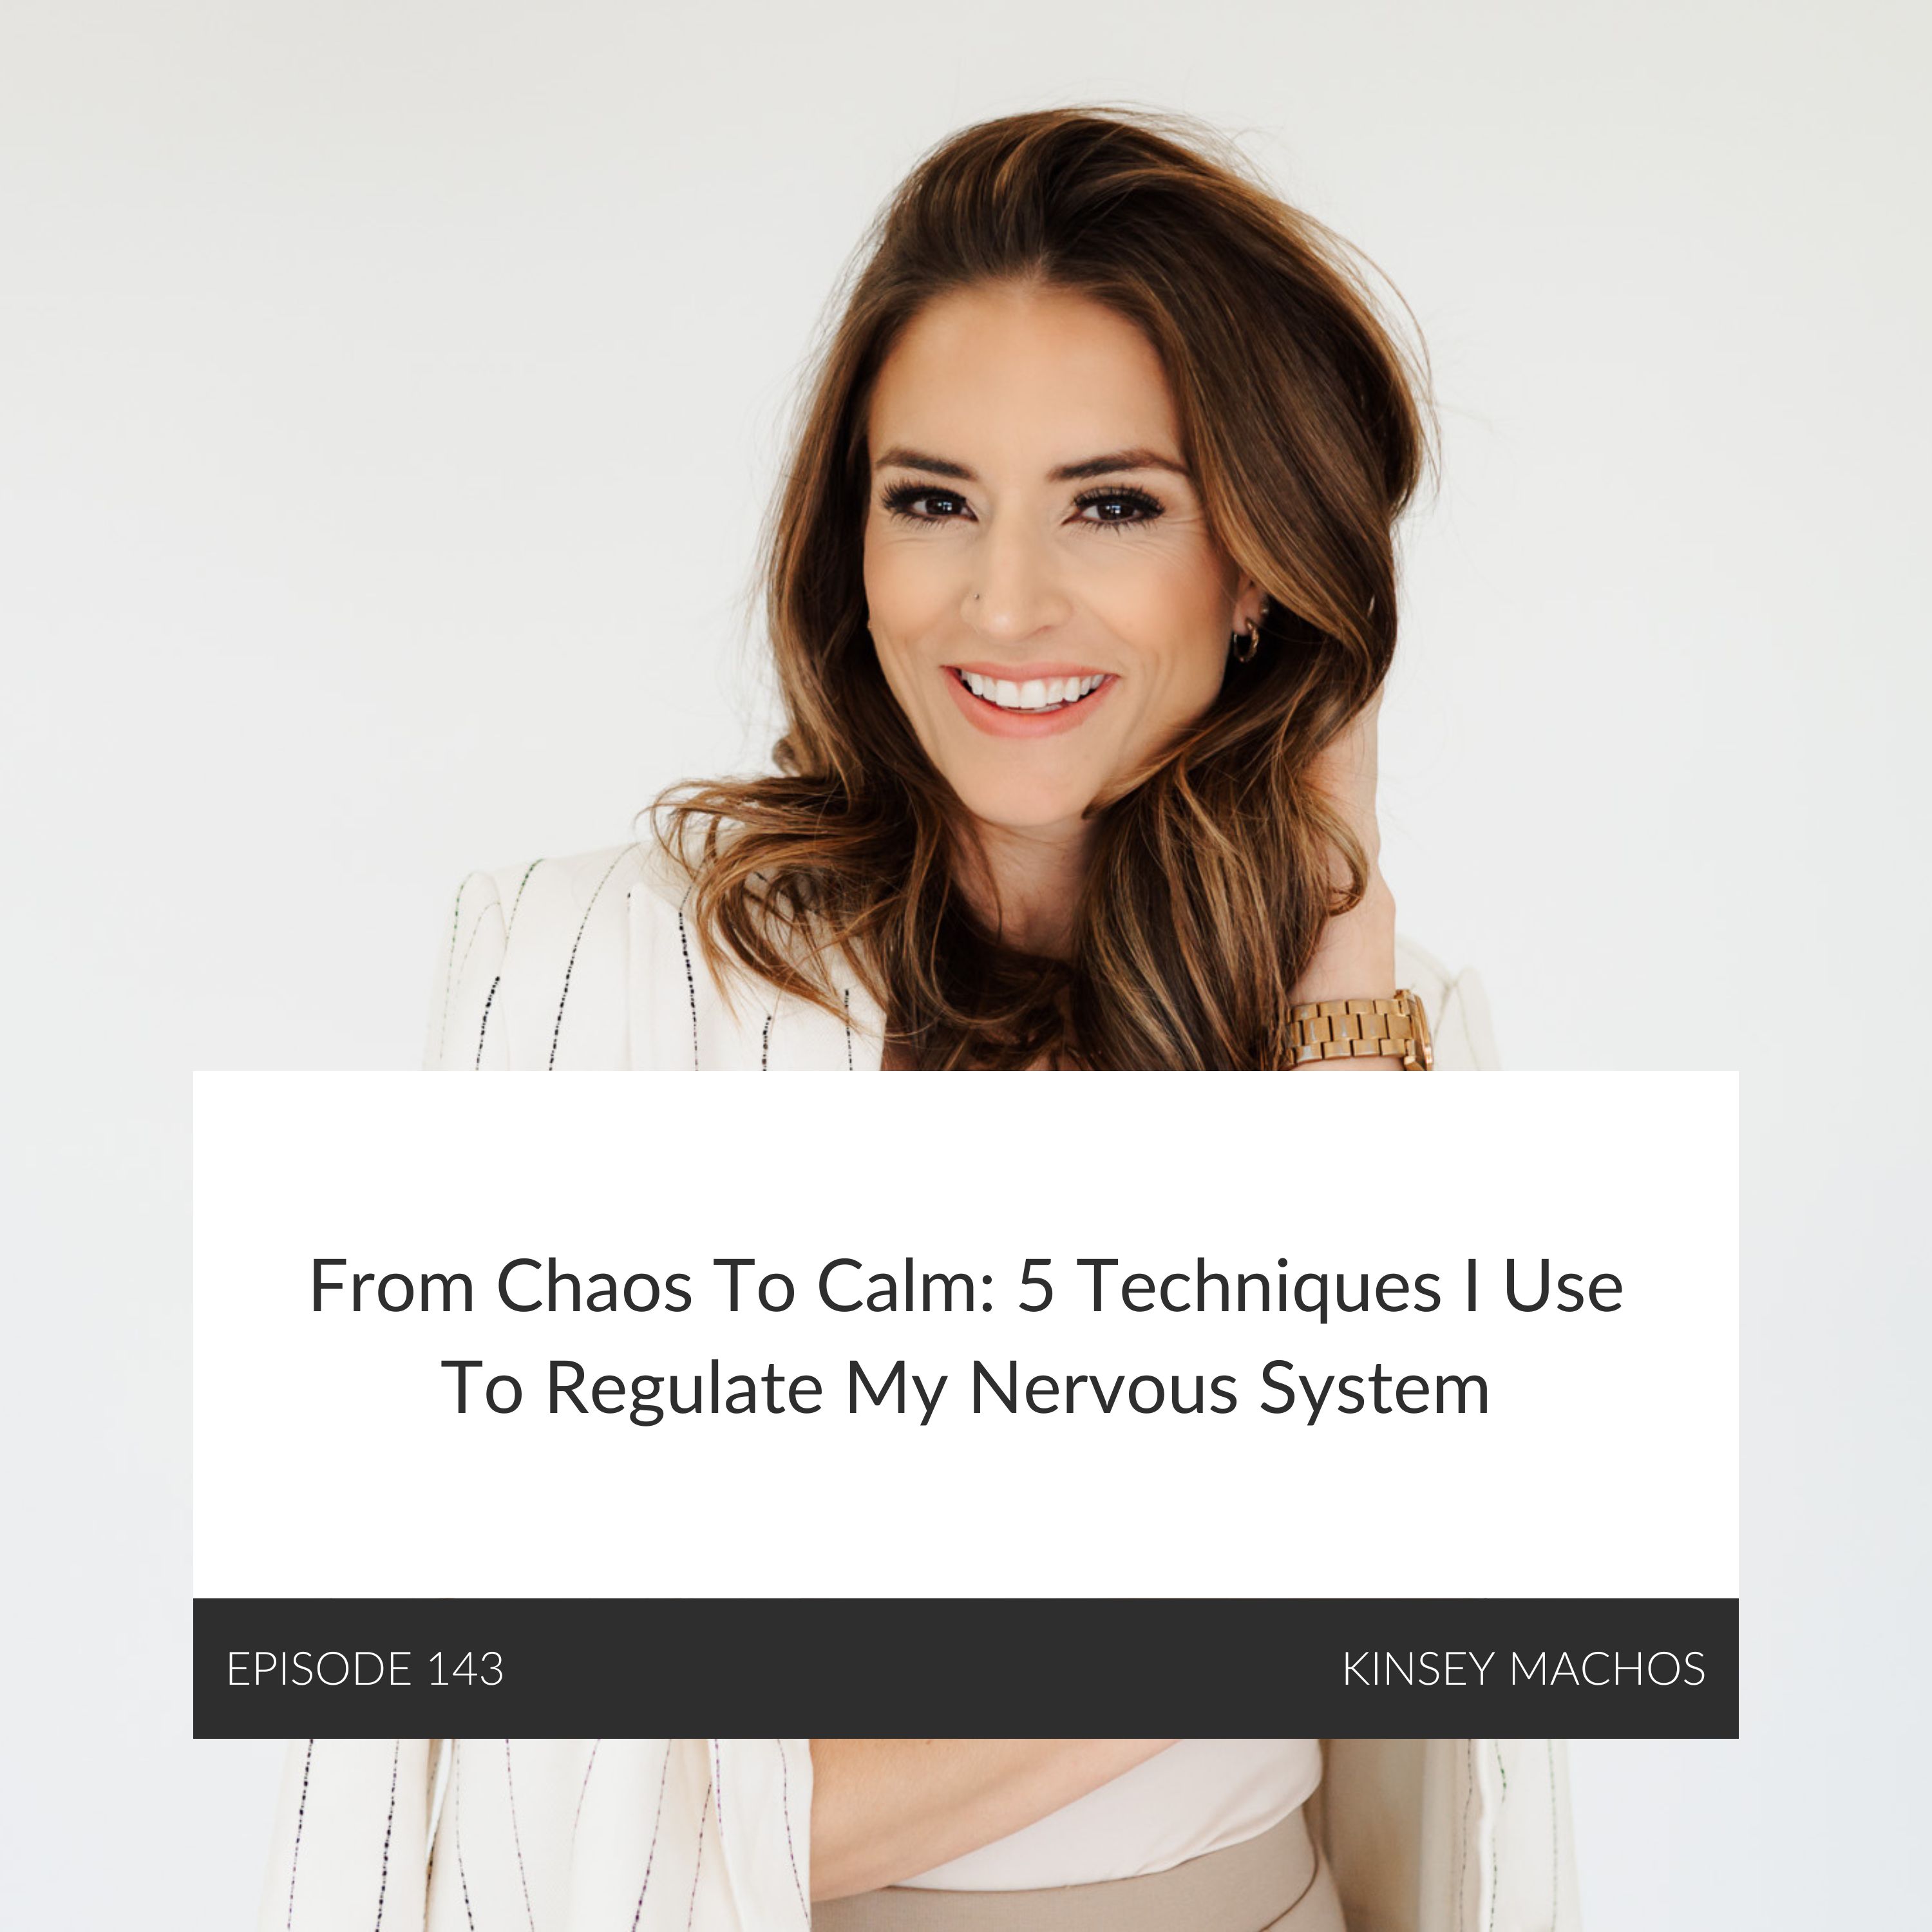 From Chaos To Calm: 5 Techniques I Use To Regulate My Nervous System